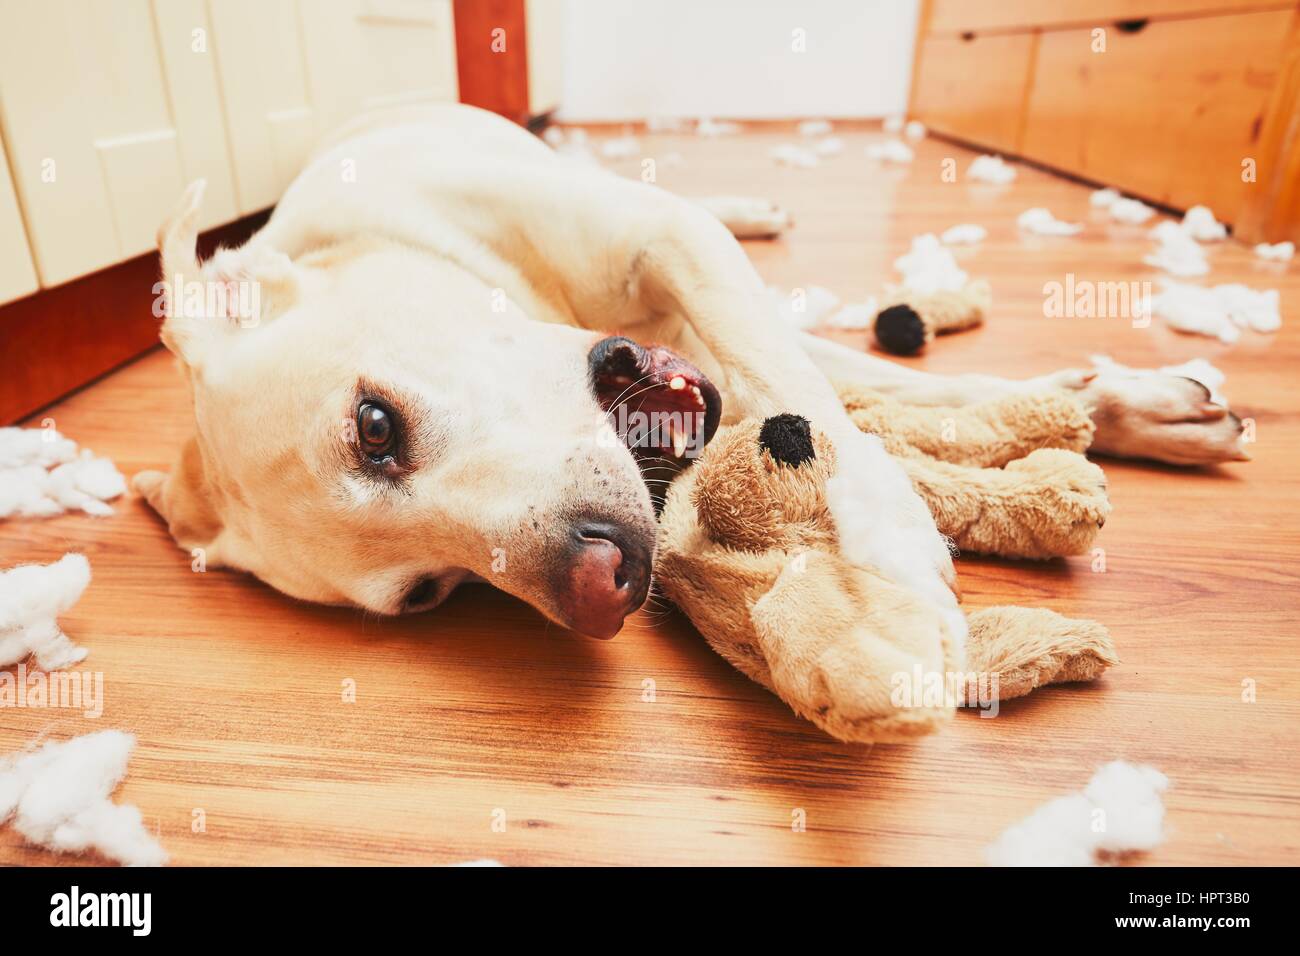 Naughty dog home alone - yellow labrador retriever destroyed the plush toy and made a mess in the apartment Stock Photo